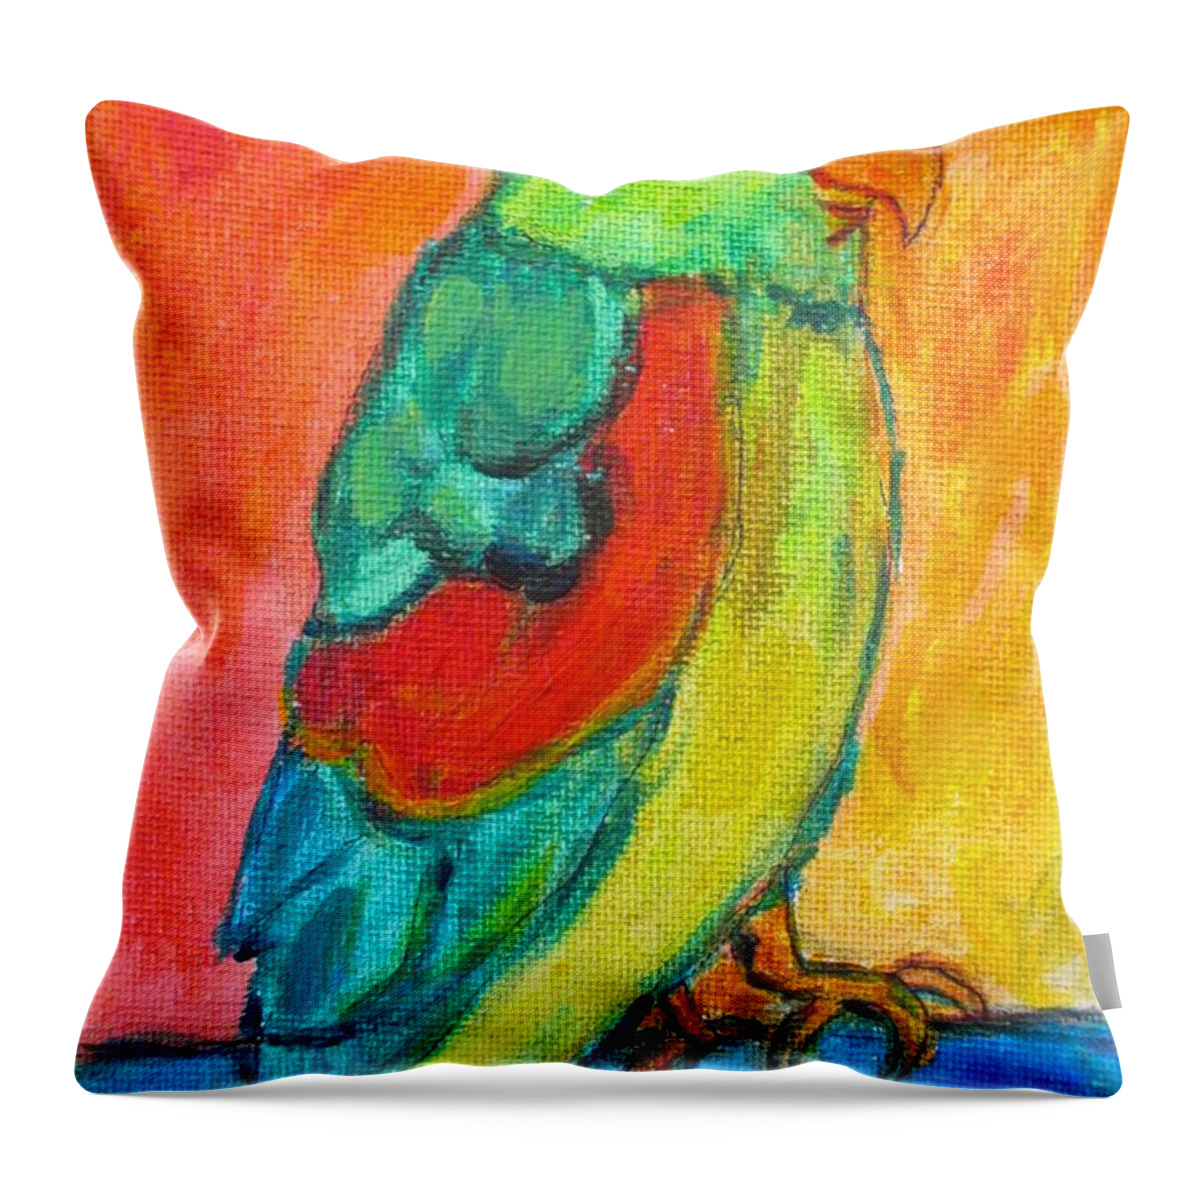 Parrot Throw Pillow featuring the painting Parrot Perch by Kendall Kessler